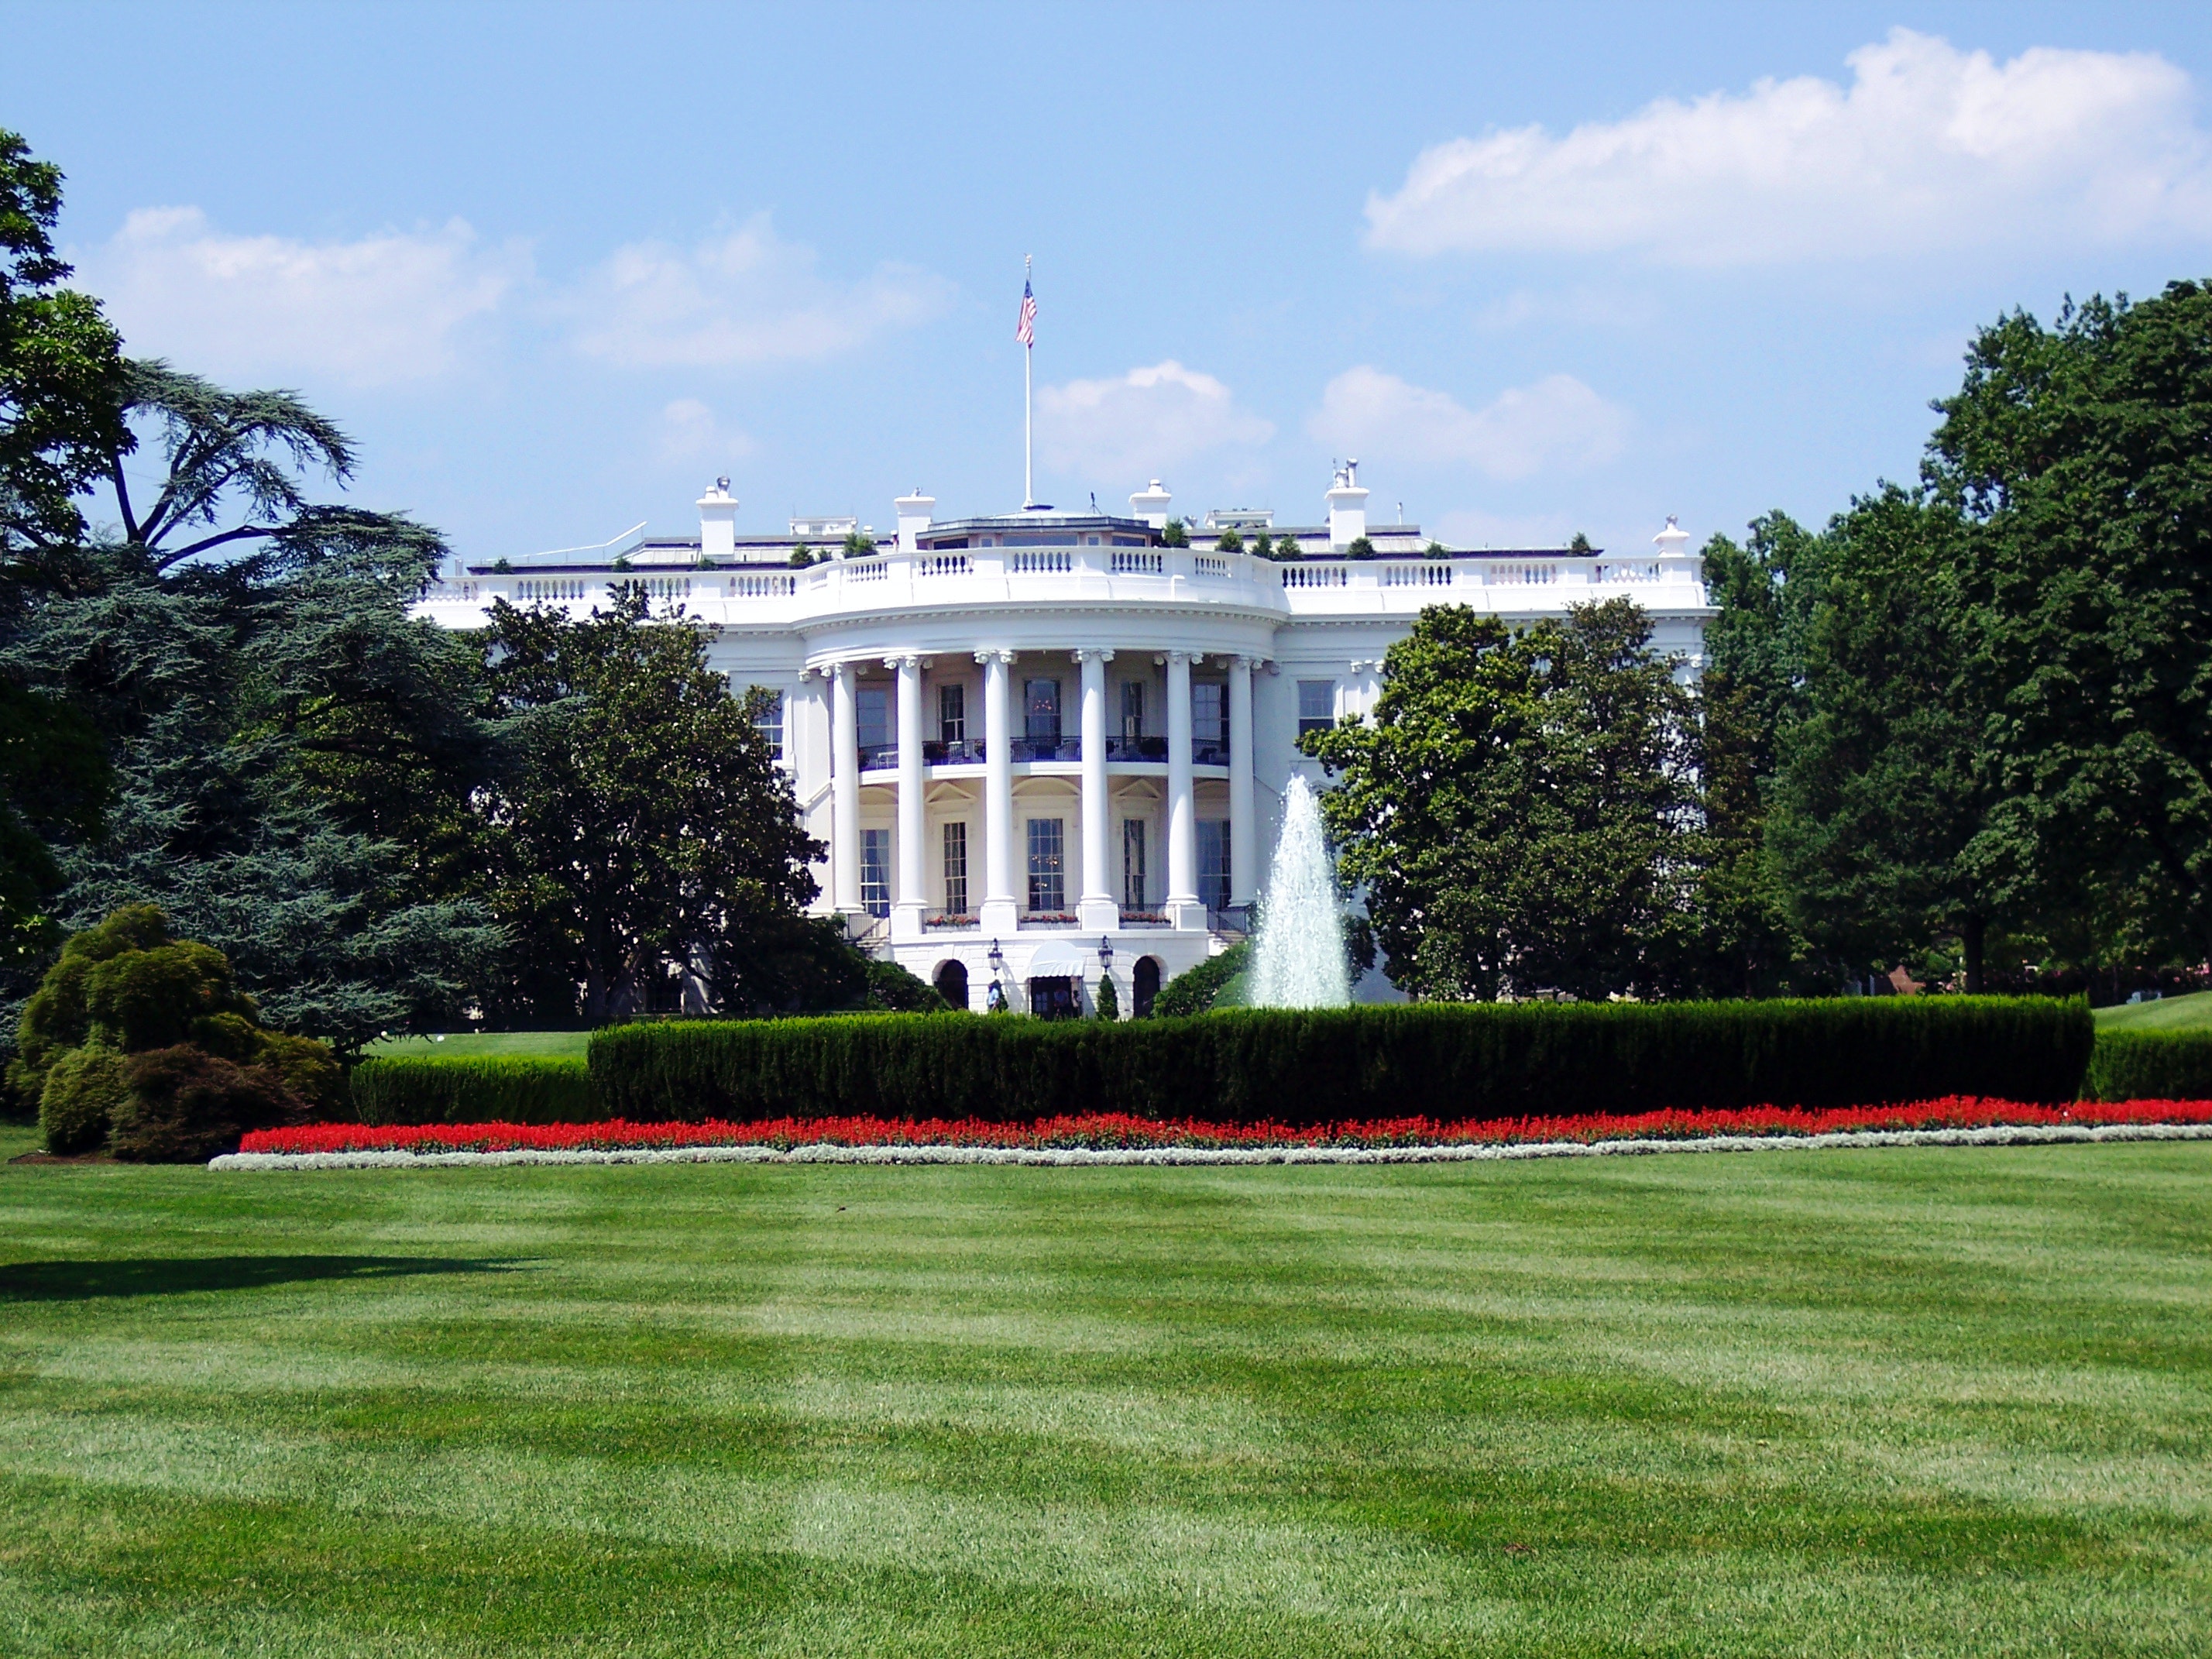 White House Photo by Aaron Kittredge from Pexels